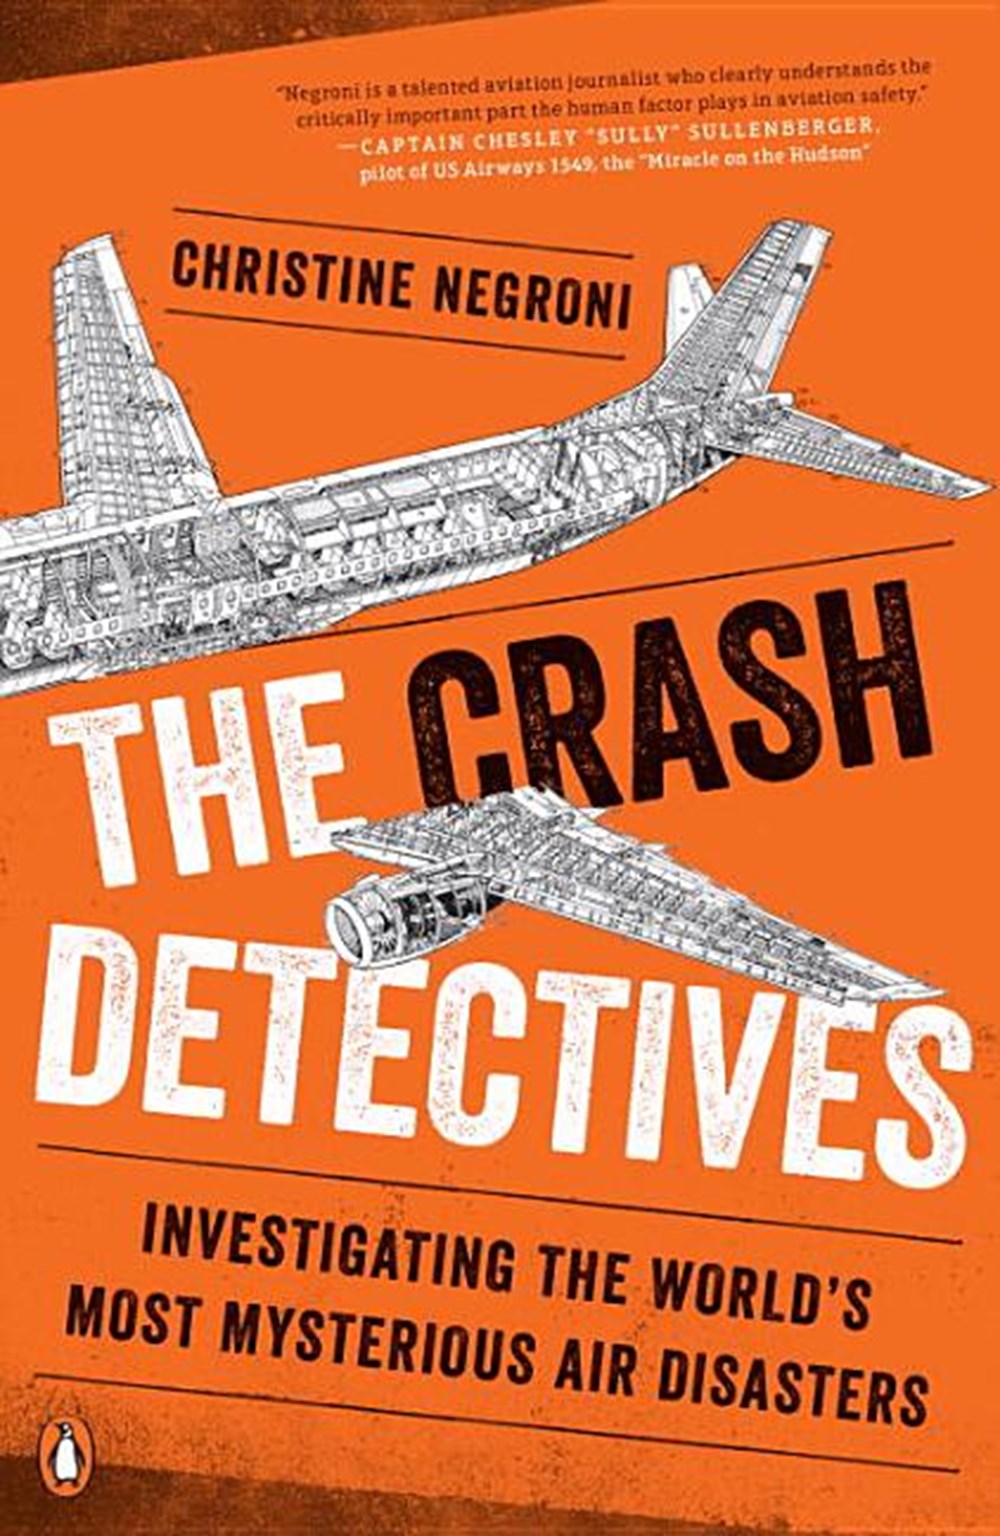 Crash Detectives: Investigating the World's Most Mysterious Air Disasters